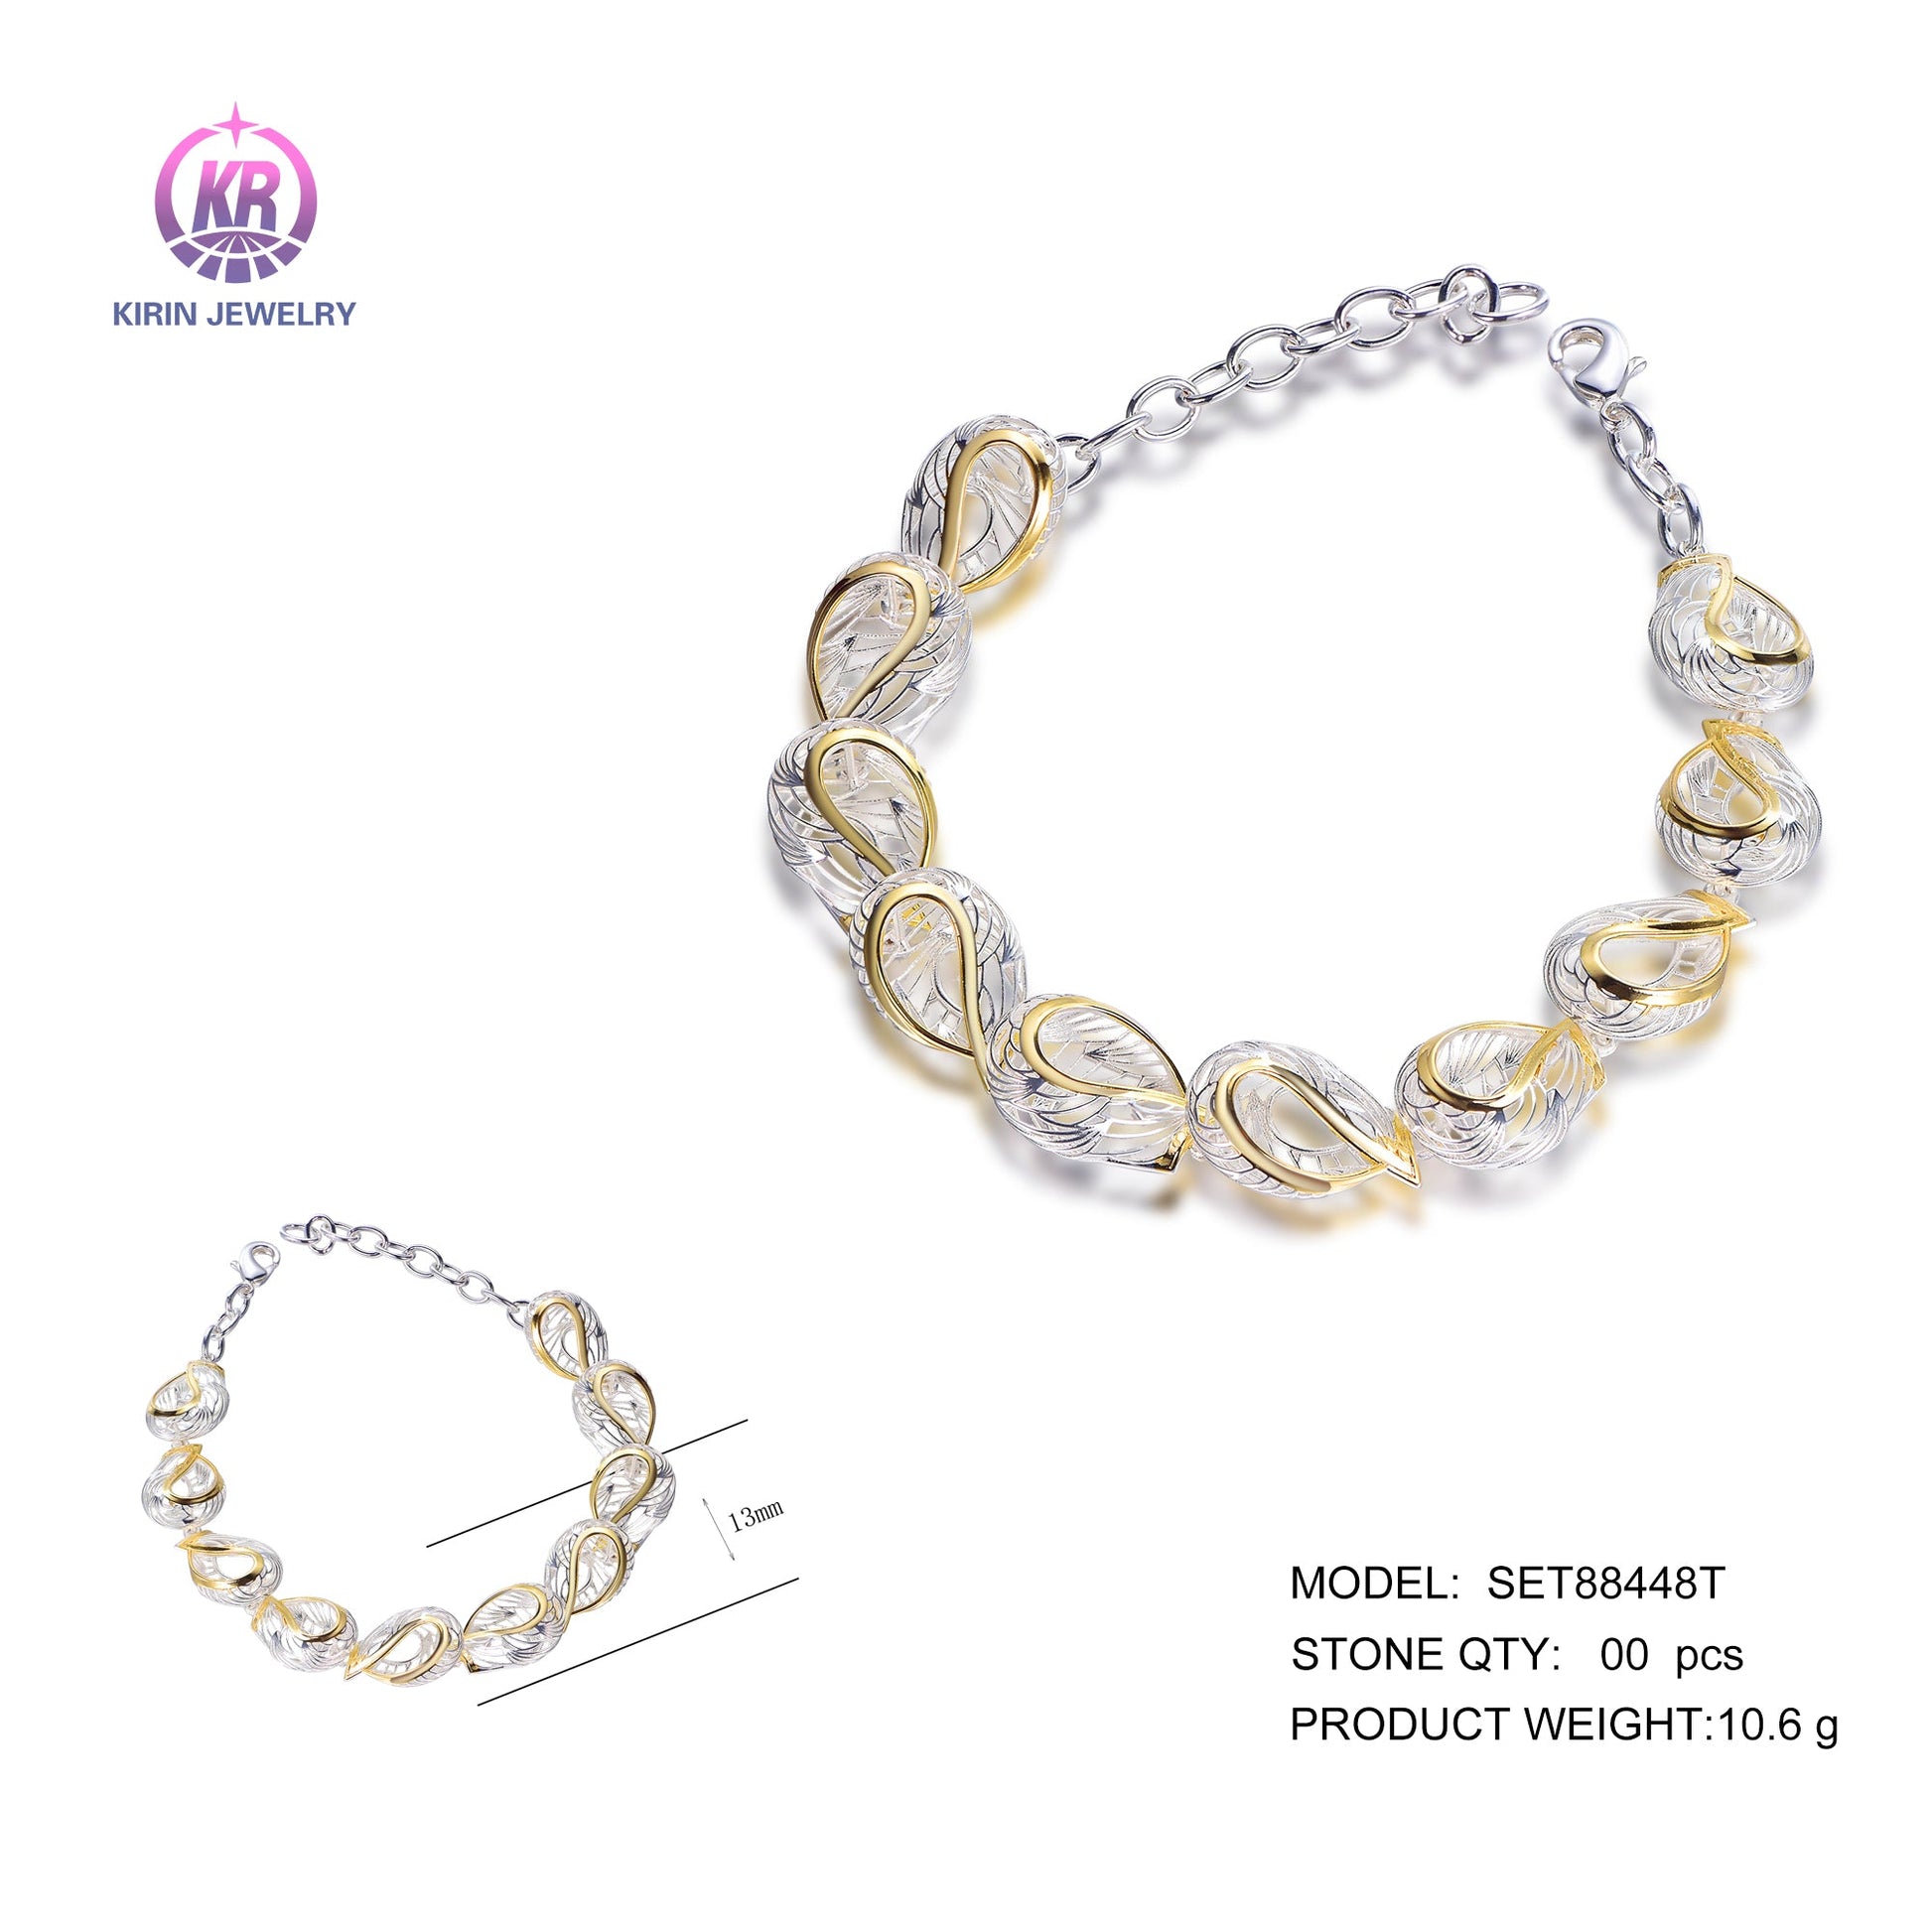 925 silver bracelet with 2-tone plating rhodium and 14K gold SET88448T Kirin Jewelry